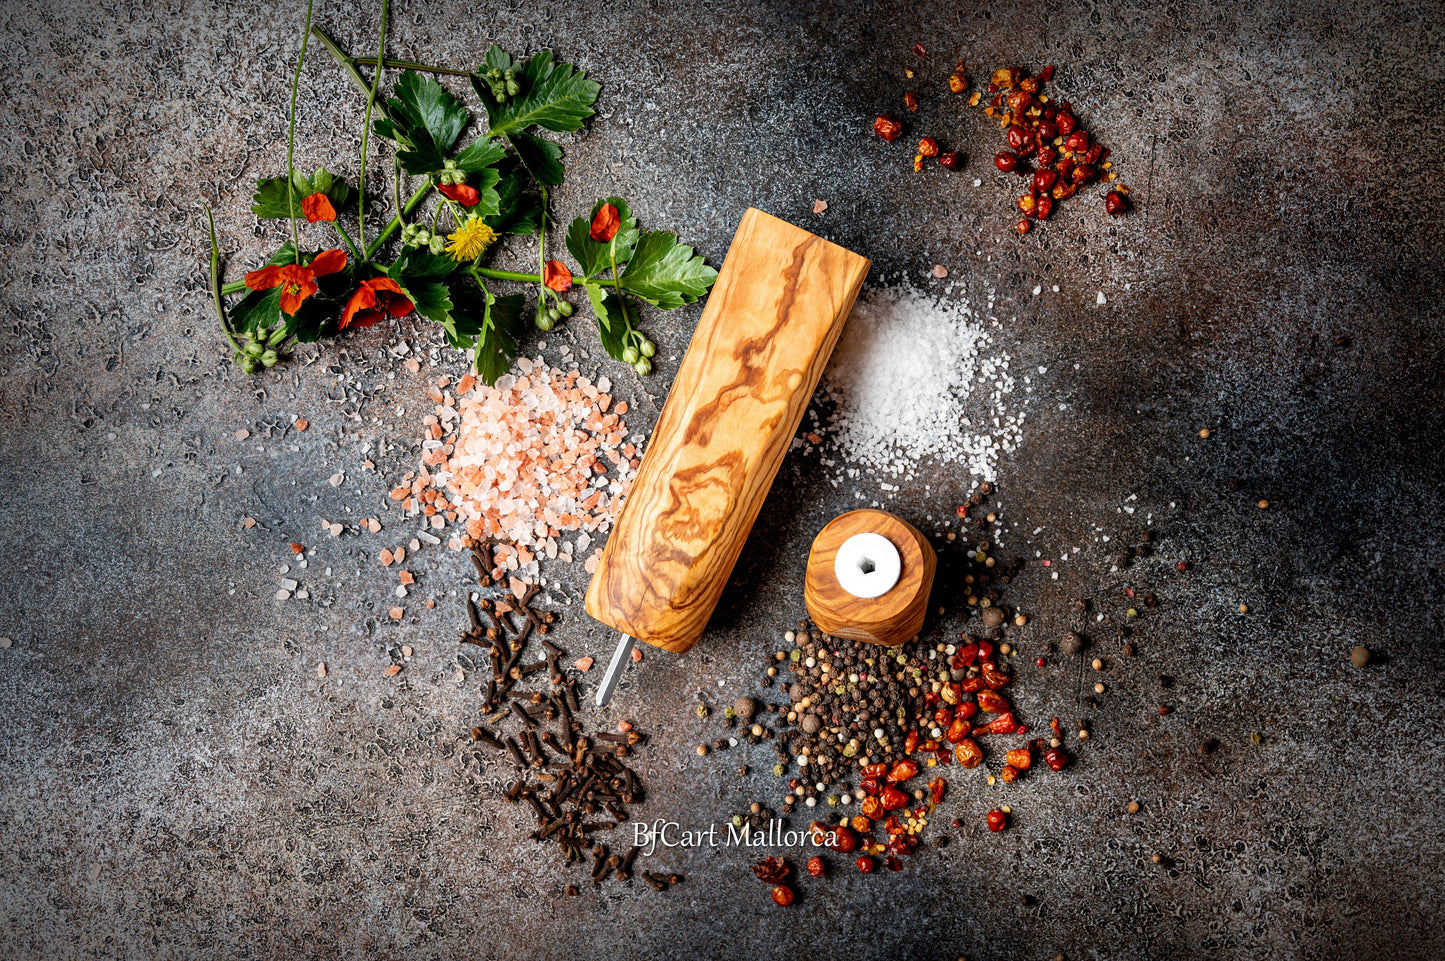 Customizable olive wood pepper mill for peppers or salt, Exclusive and own pepper shaker design